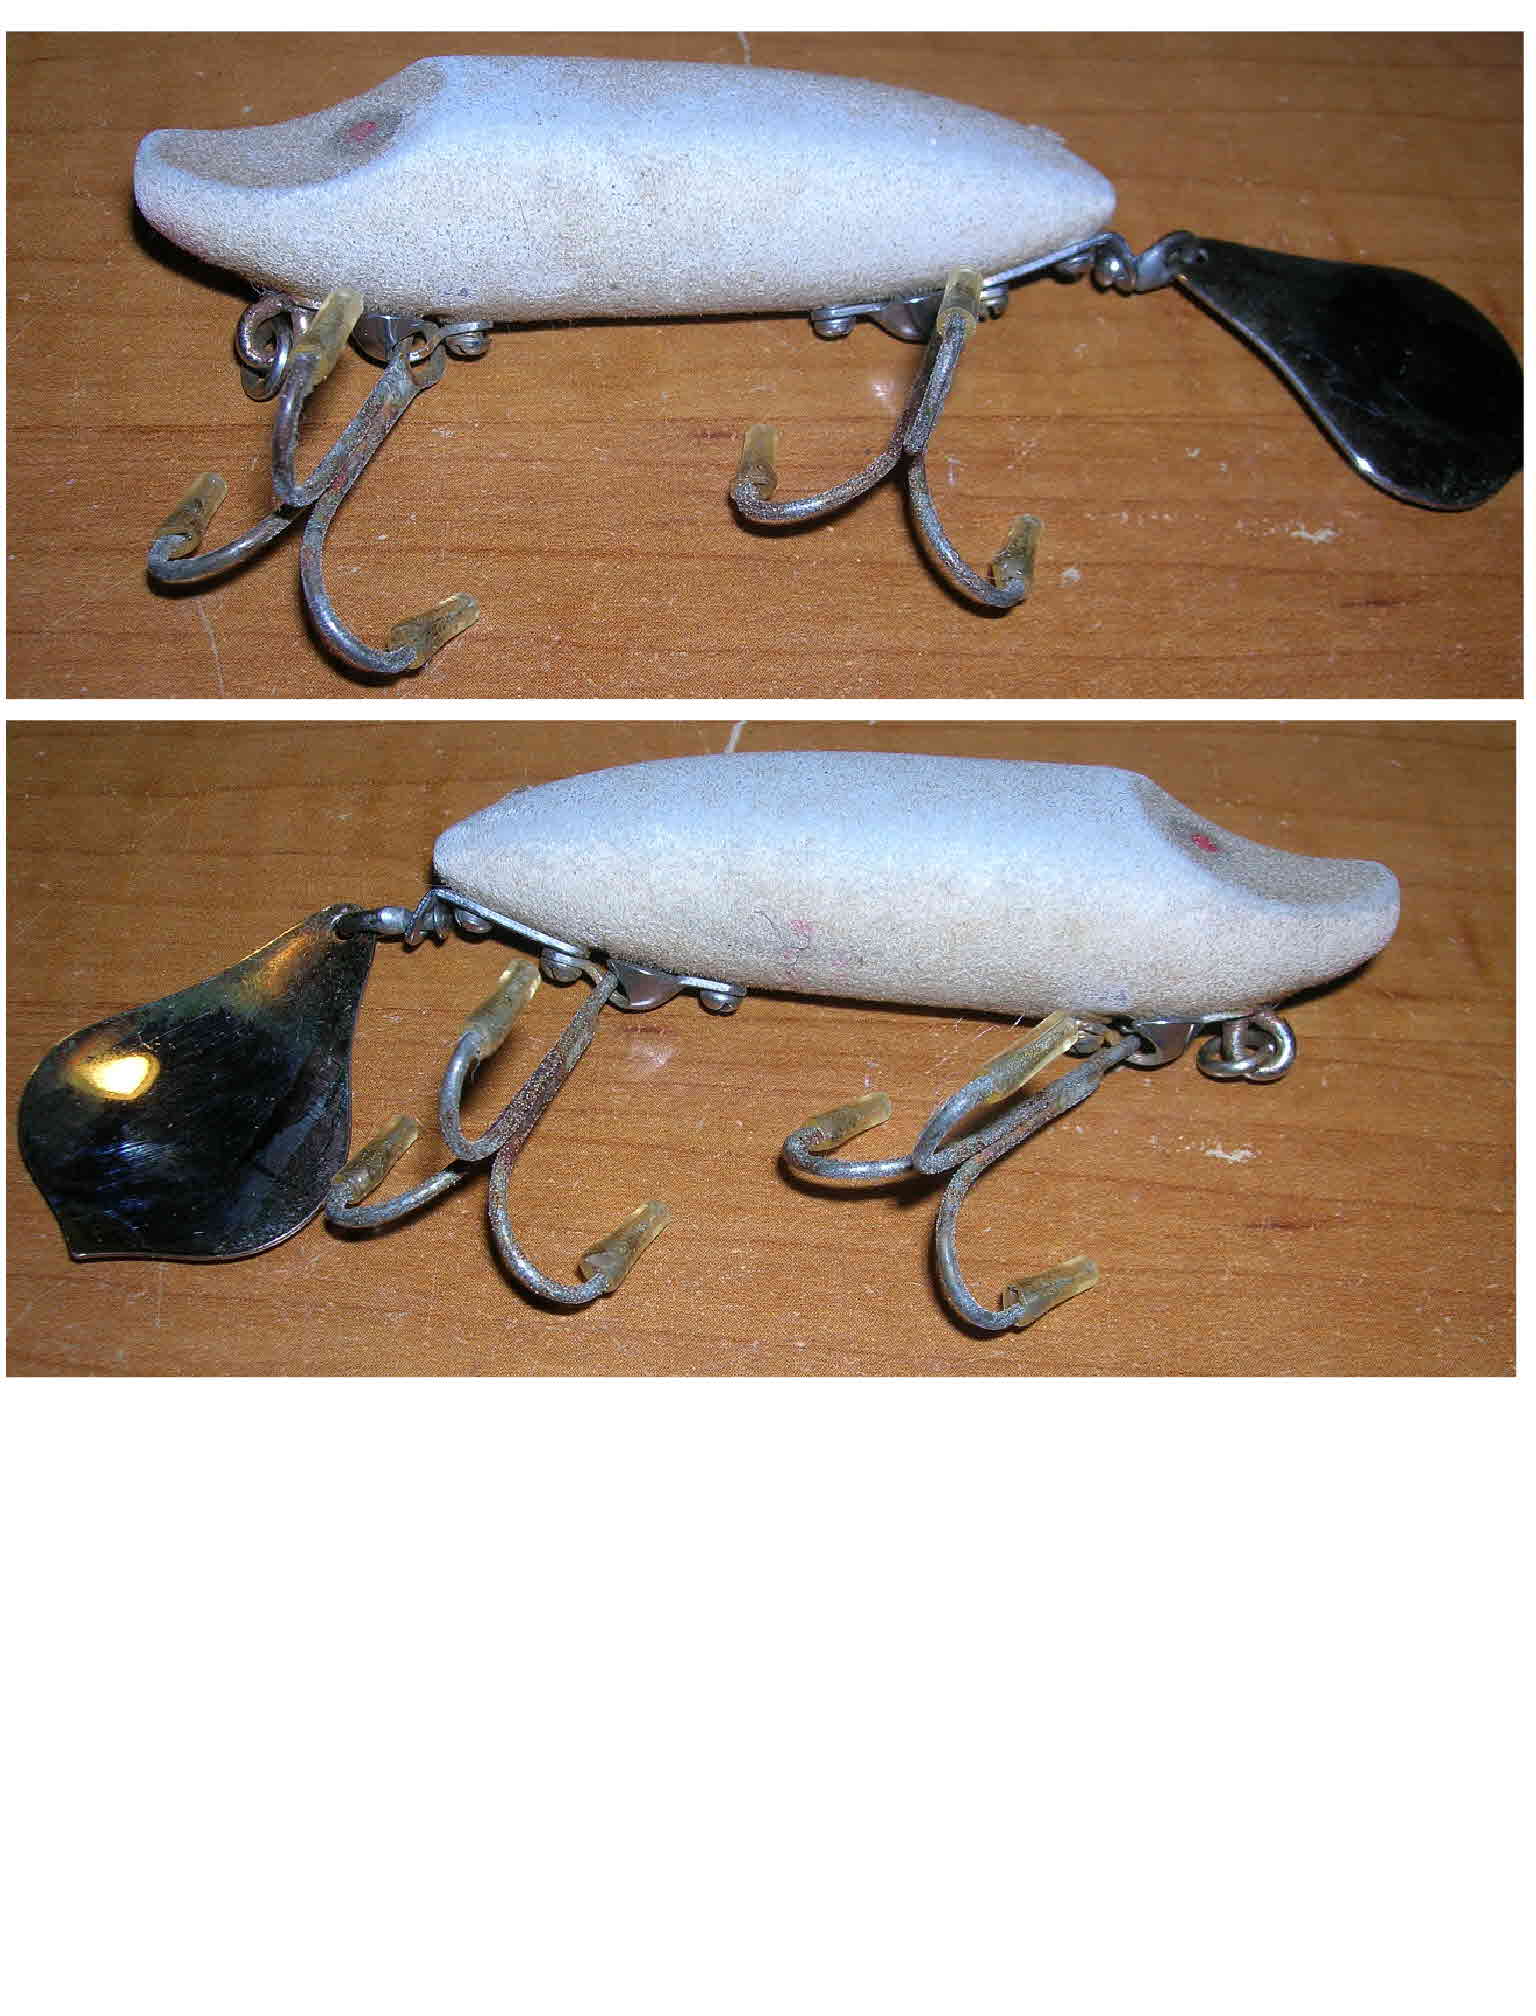 Vintage Heddon Meadow Mouse Fishing Lure 